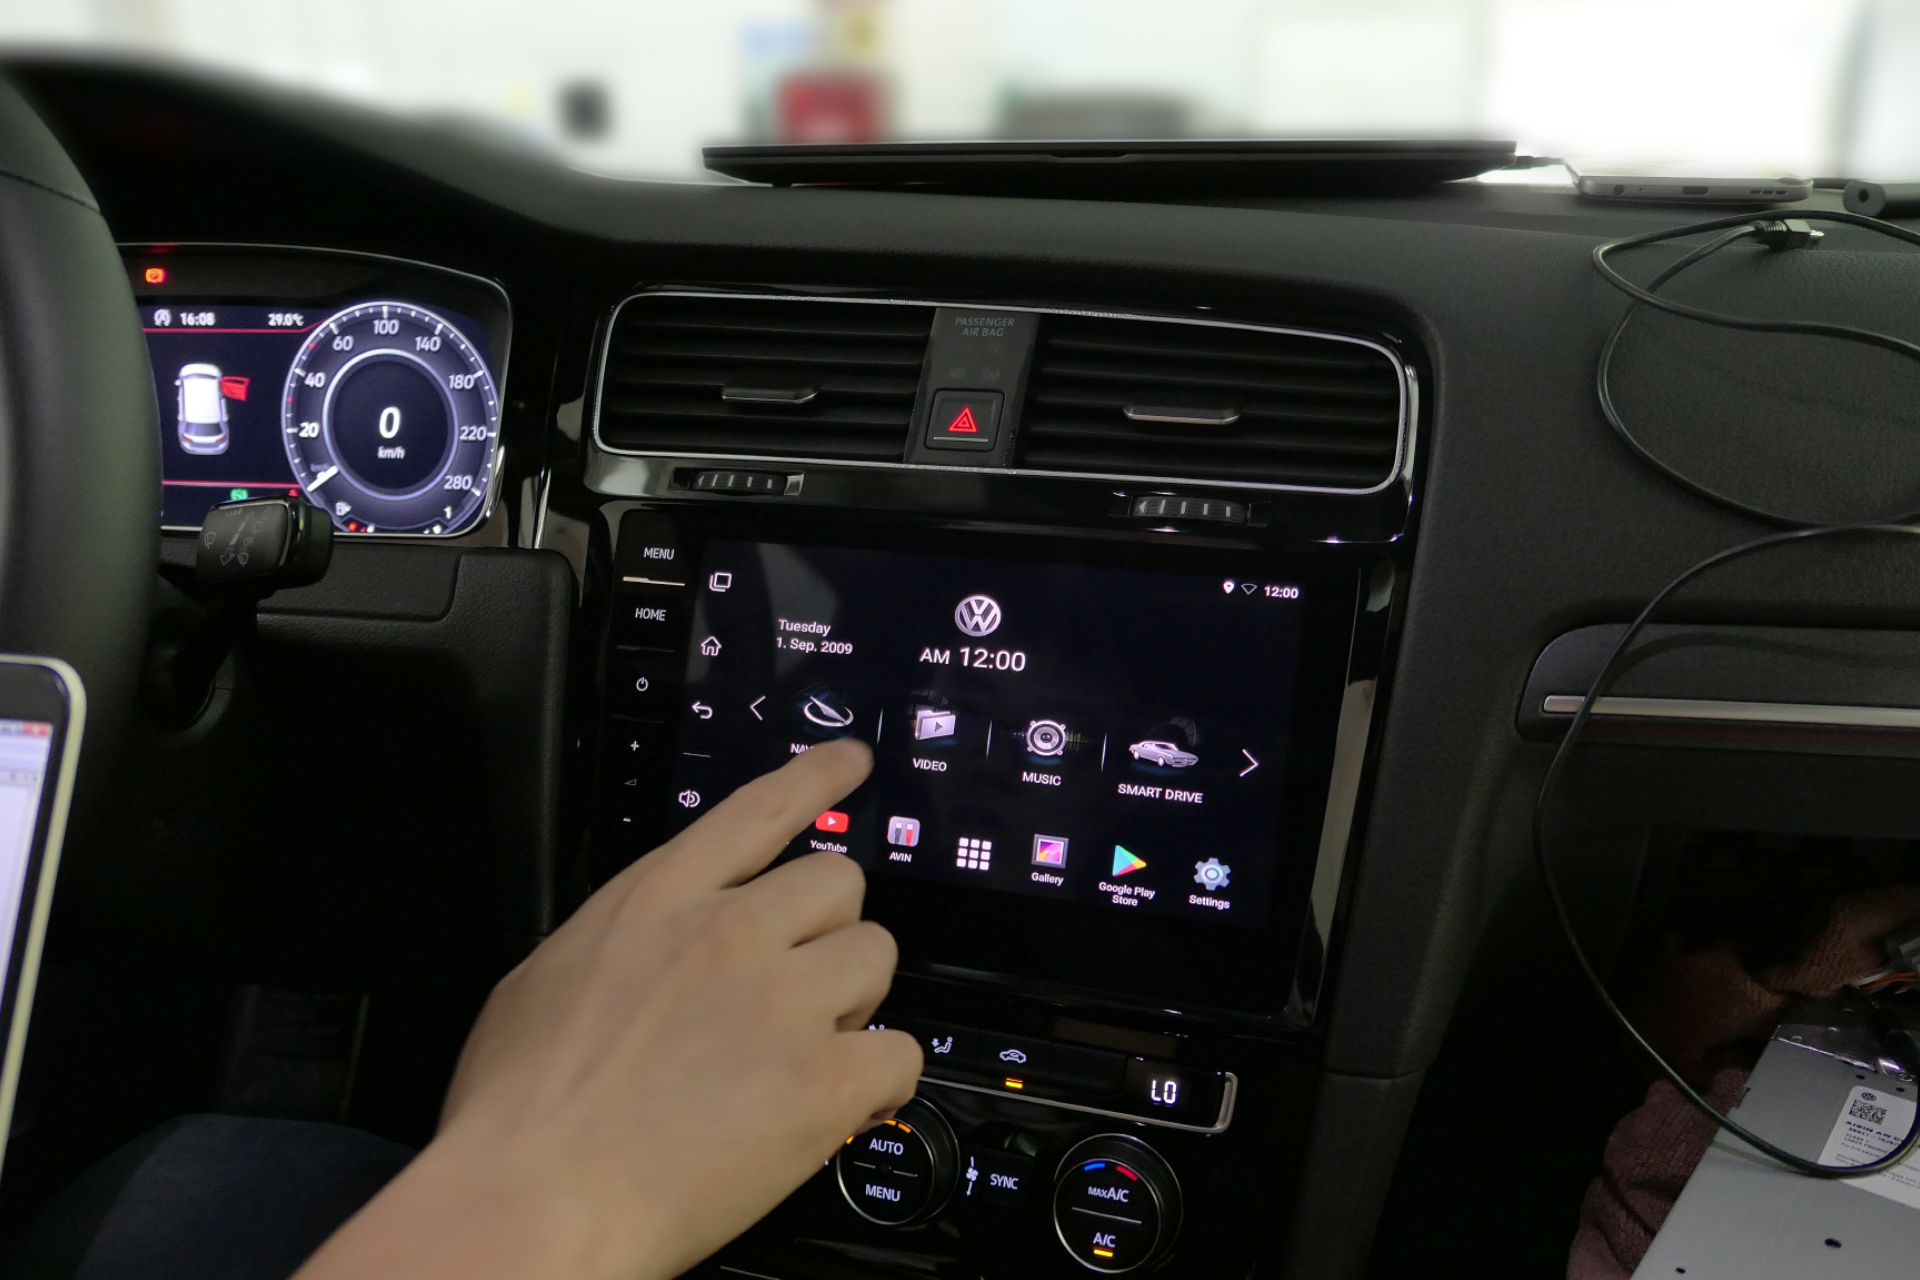 Android Ststem for 2018 volkswagen Golf "HD-LINK (IW-MIB2-N23)"